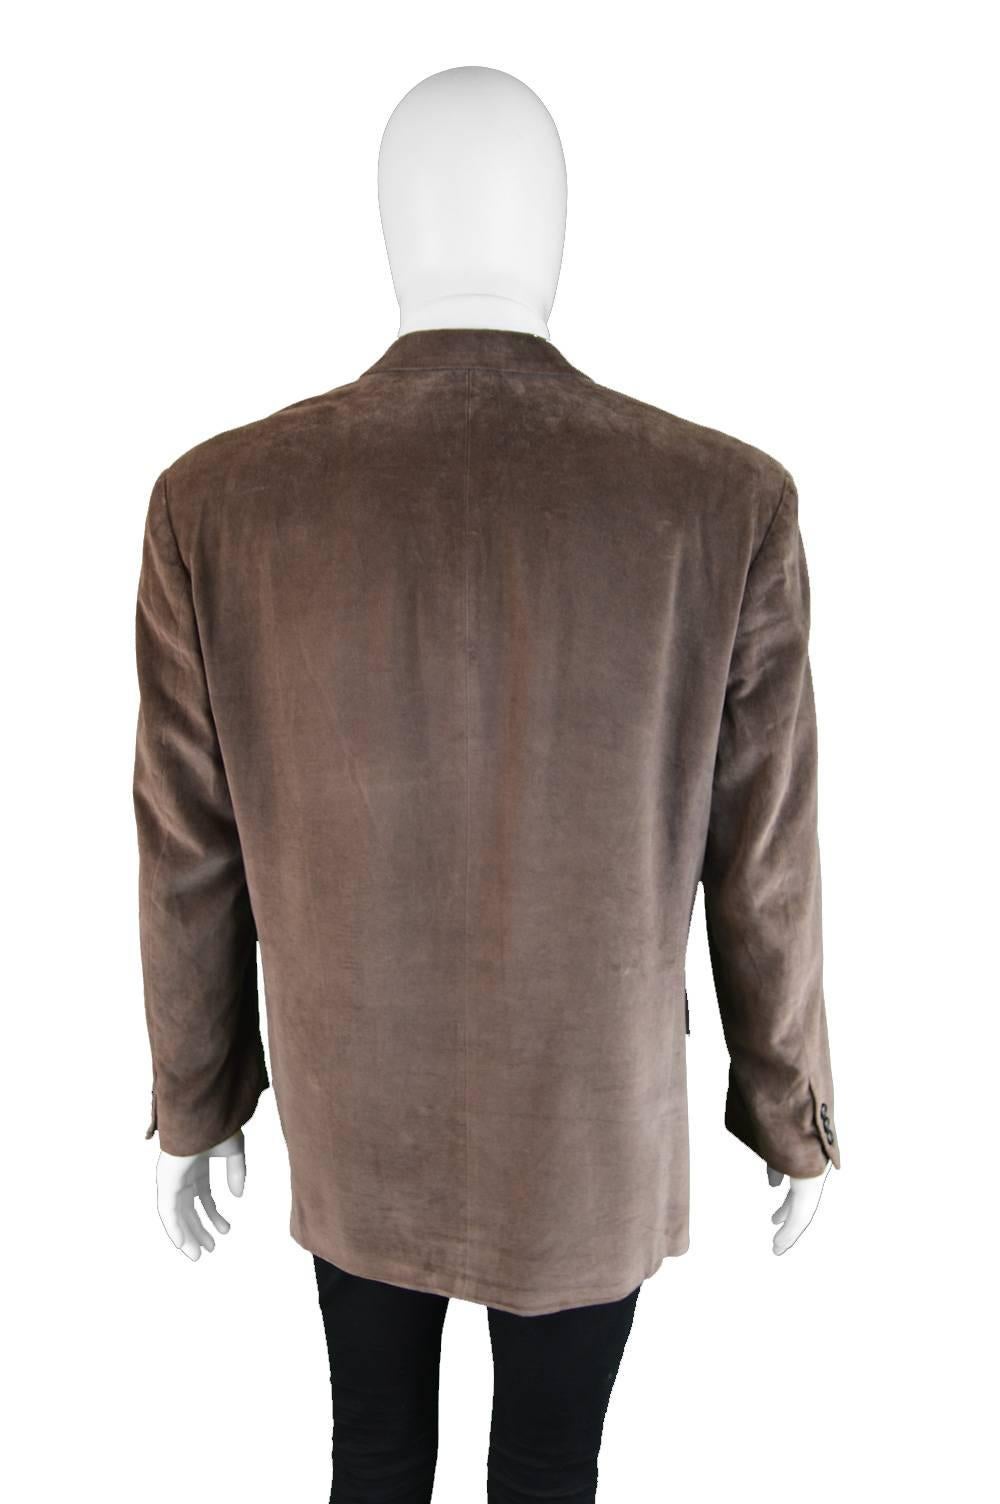 Hugo Boss Men's Vintage Brown Velvet Double Breasted Blazer, 1980s In Excellent Condition For Sale In Doncaster, South Yorkshire